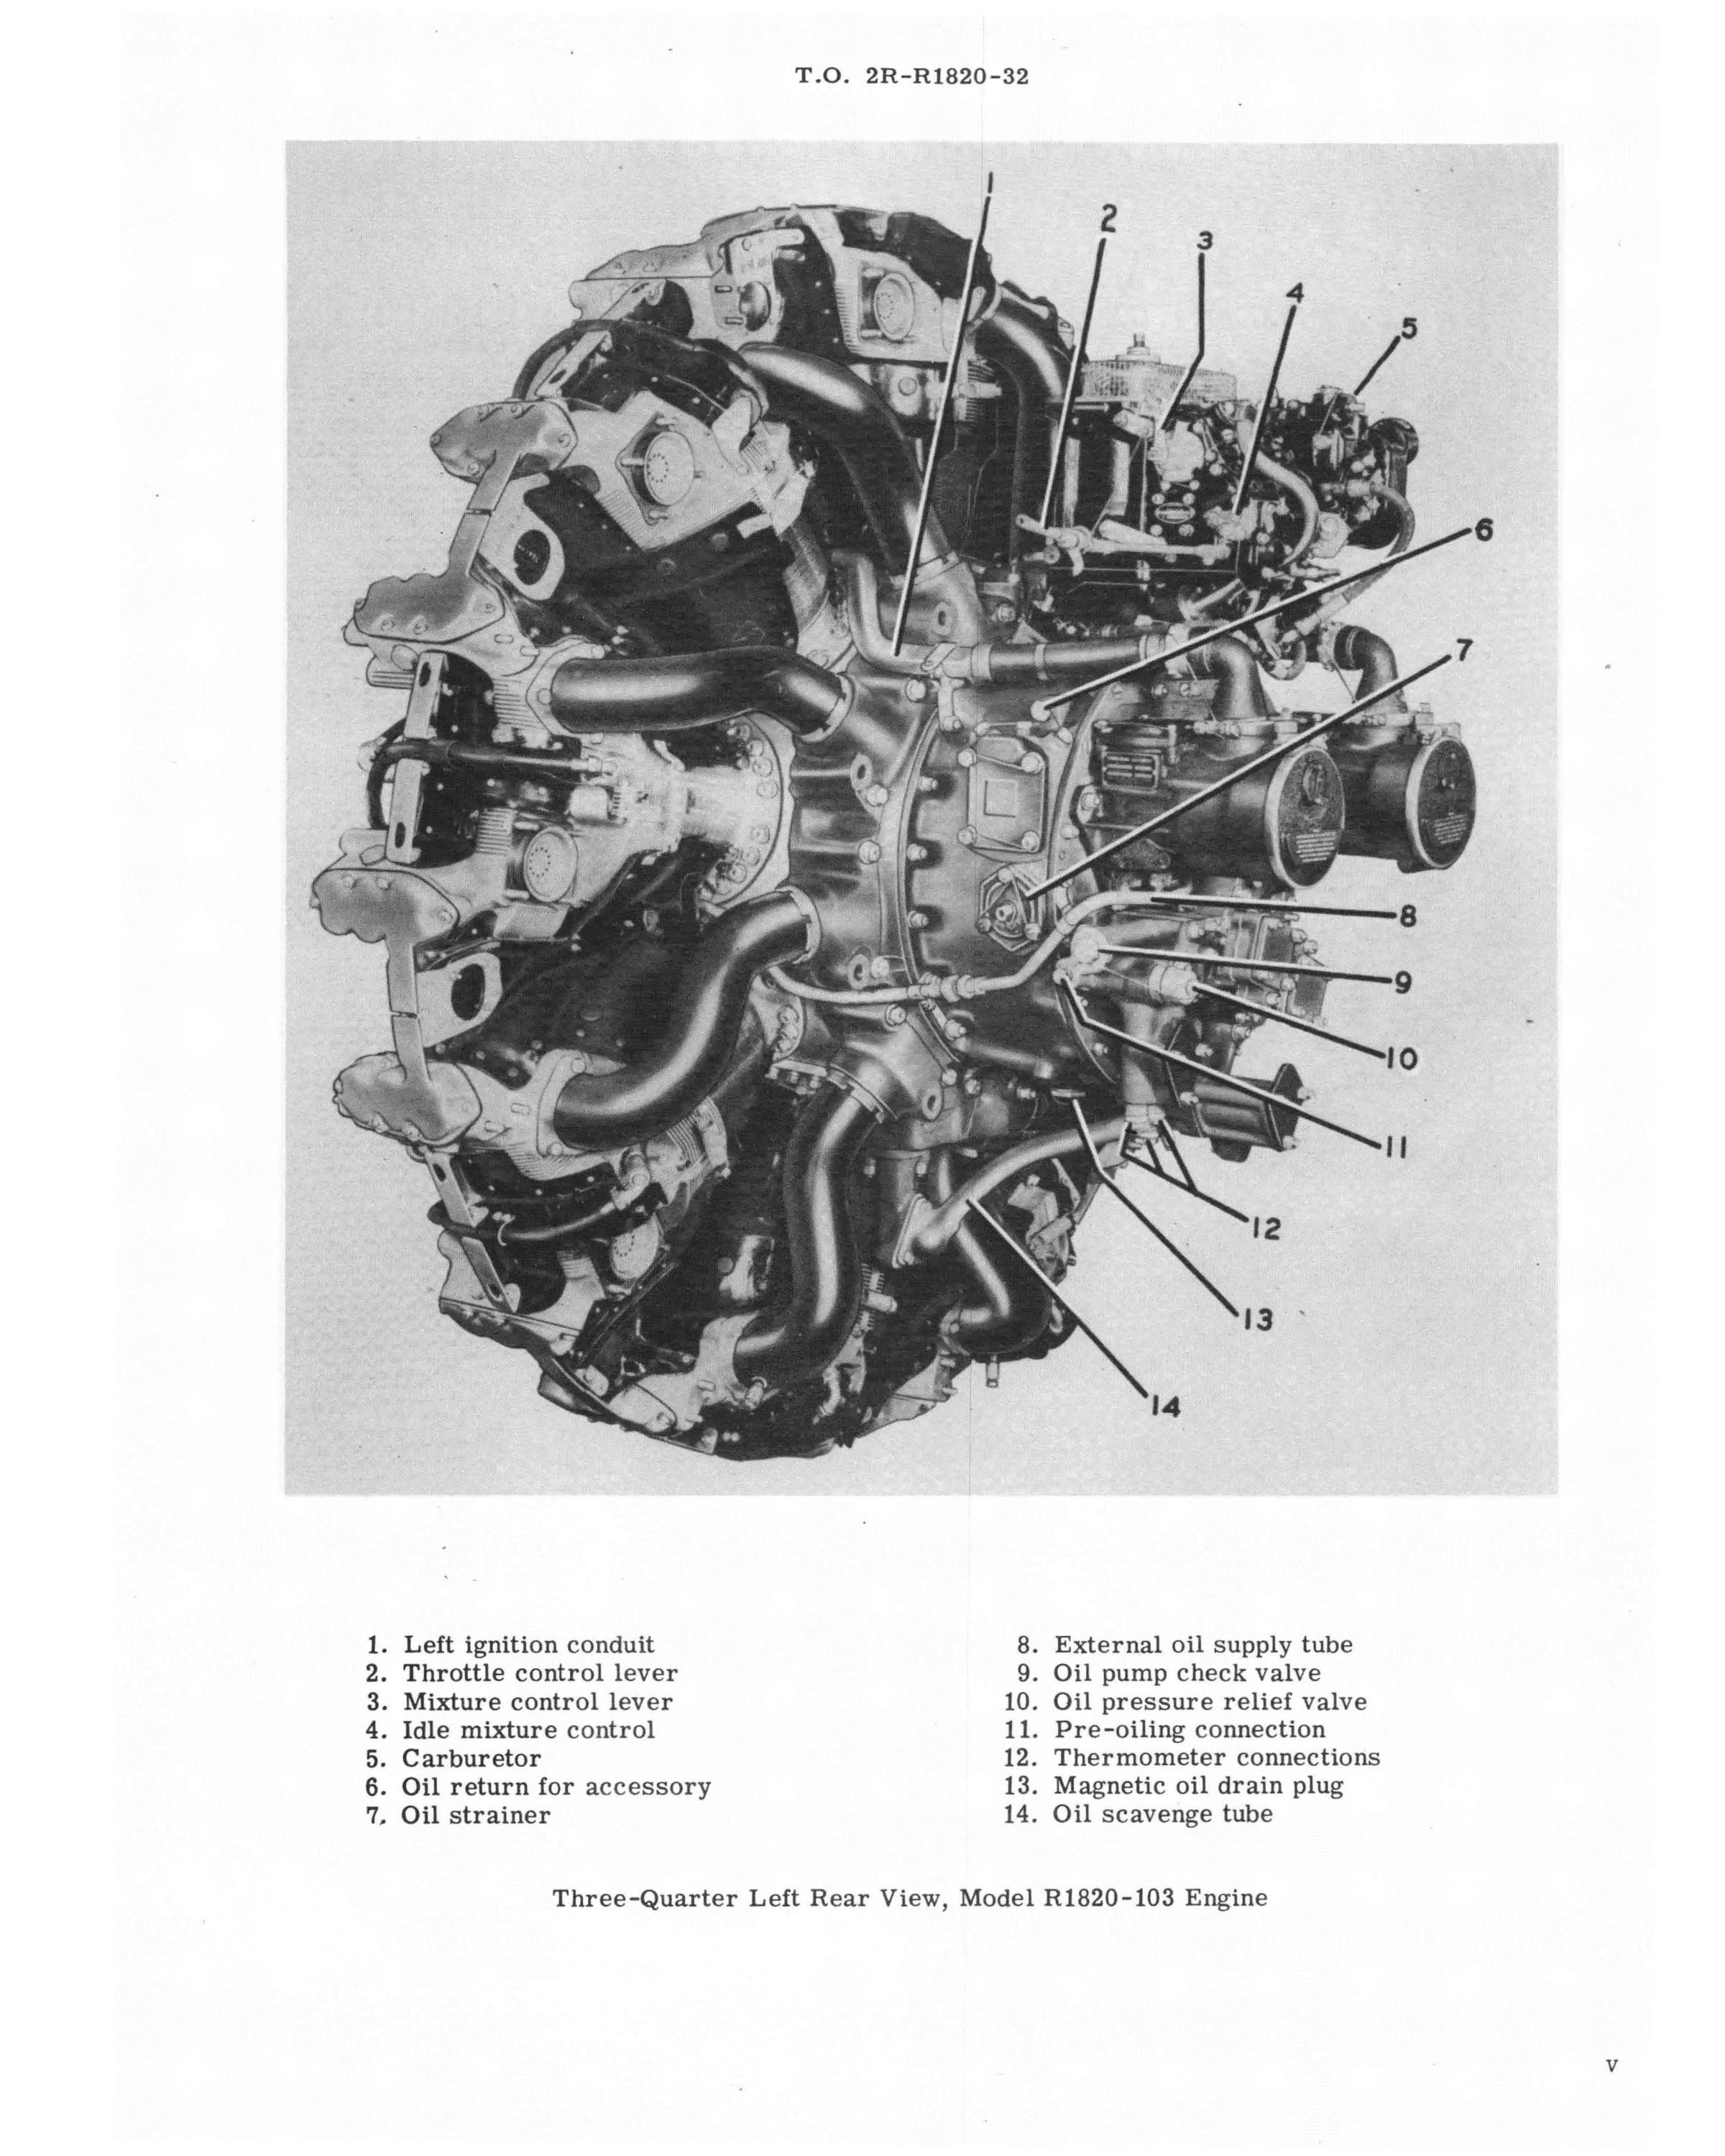 Sample page 7 from AirCorps Library document: Service Instructions for Model R-1820-103 Engine